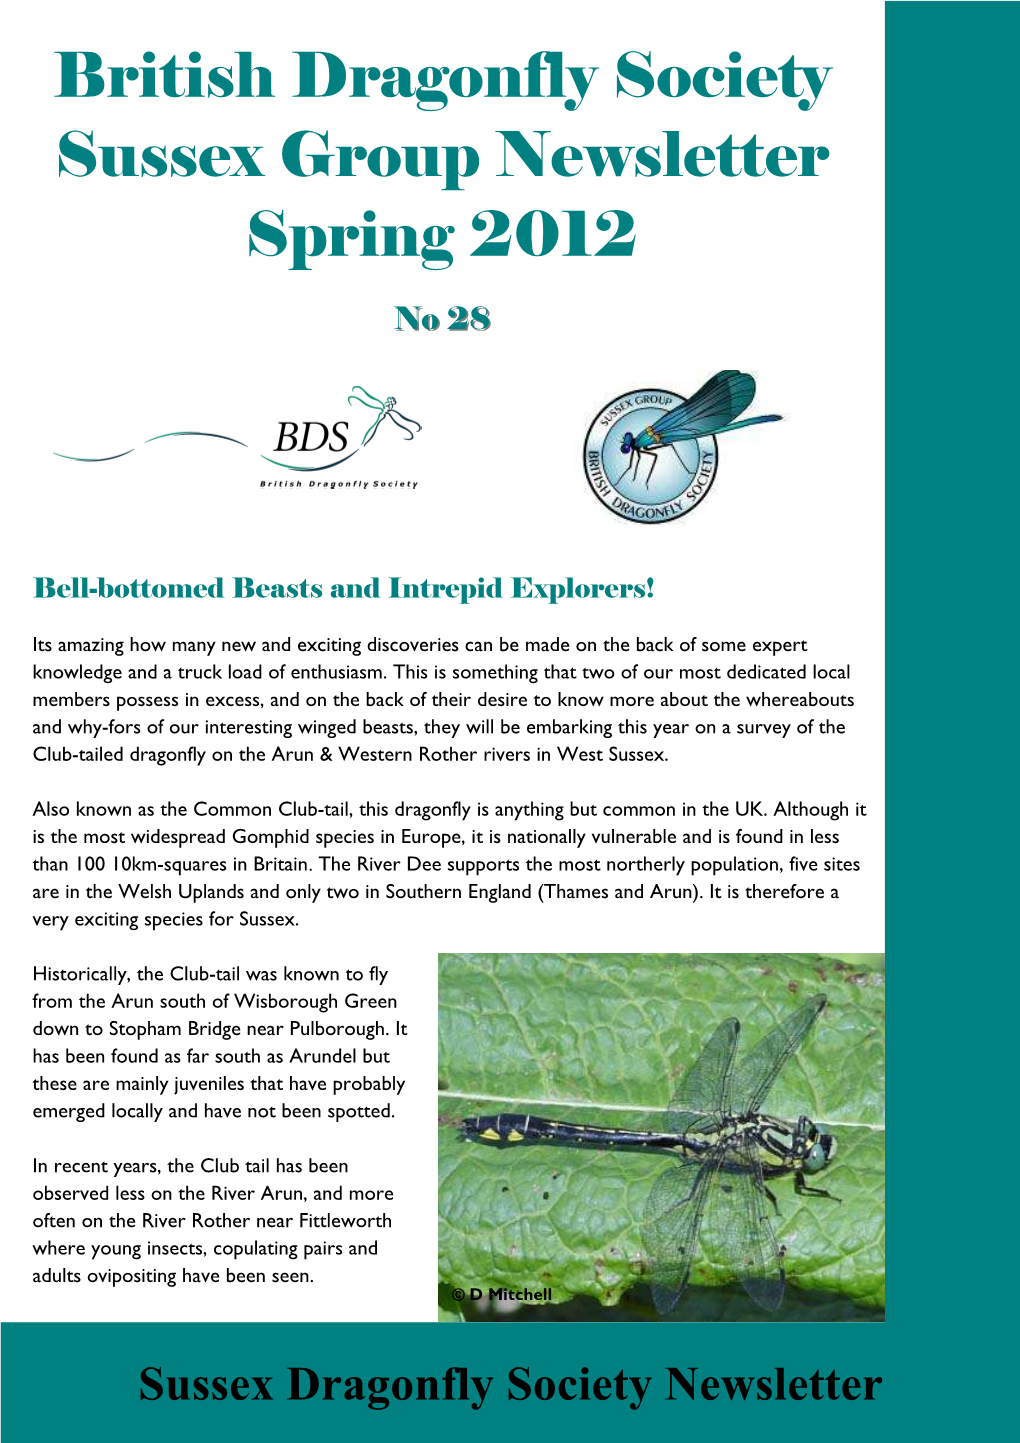 Sussex Dragonfly Society Newsletter